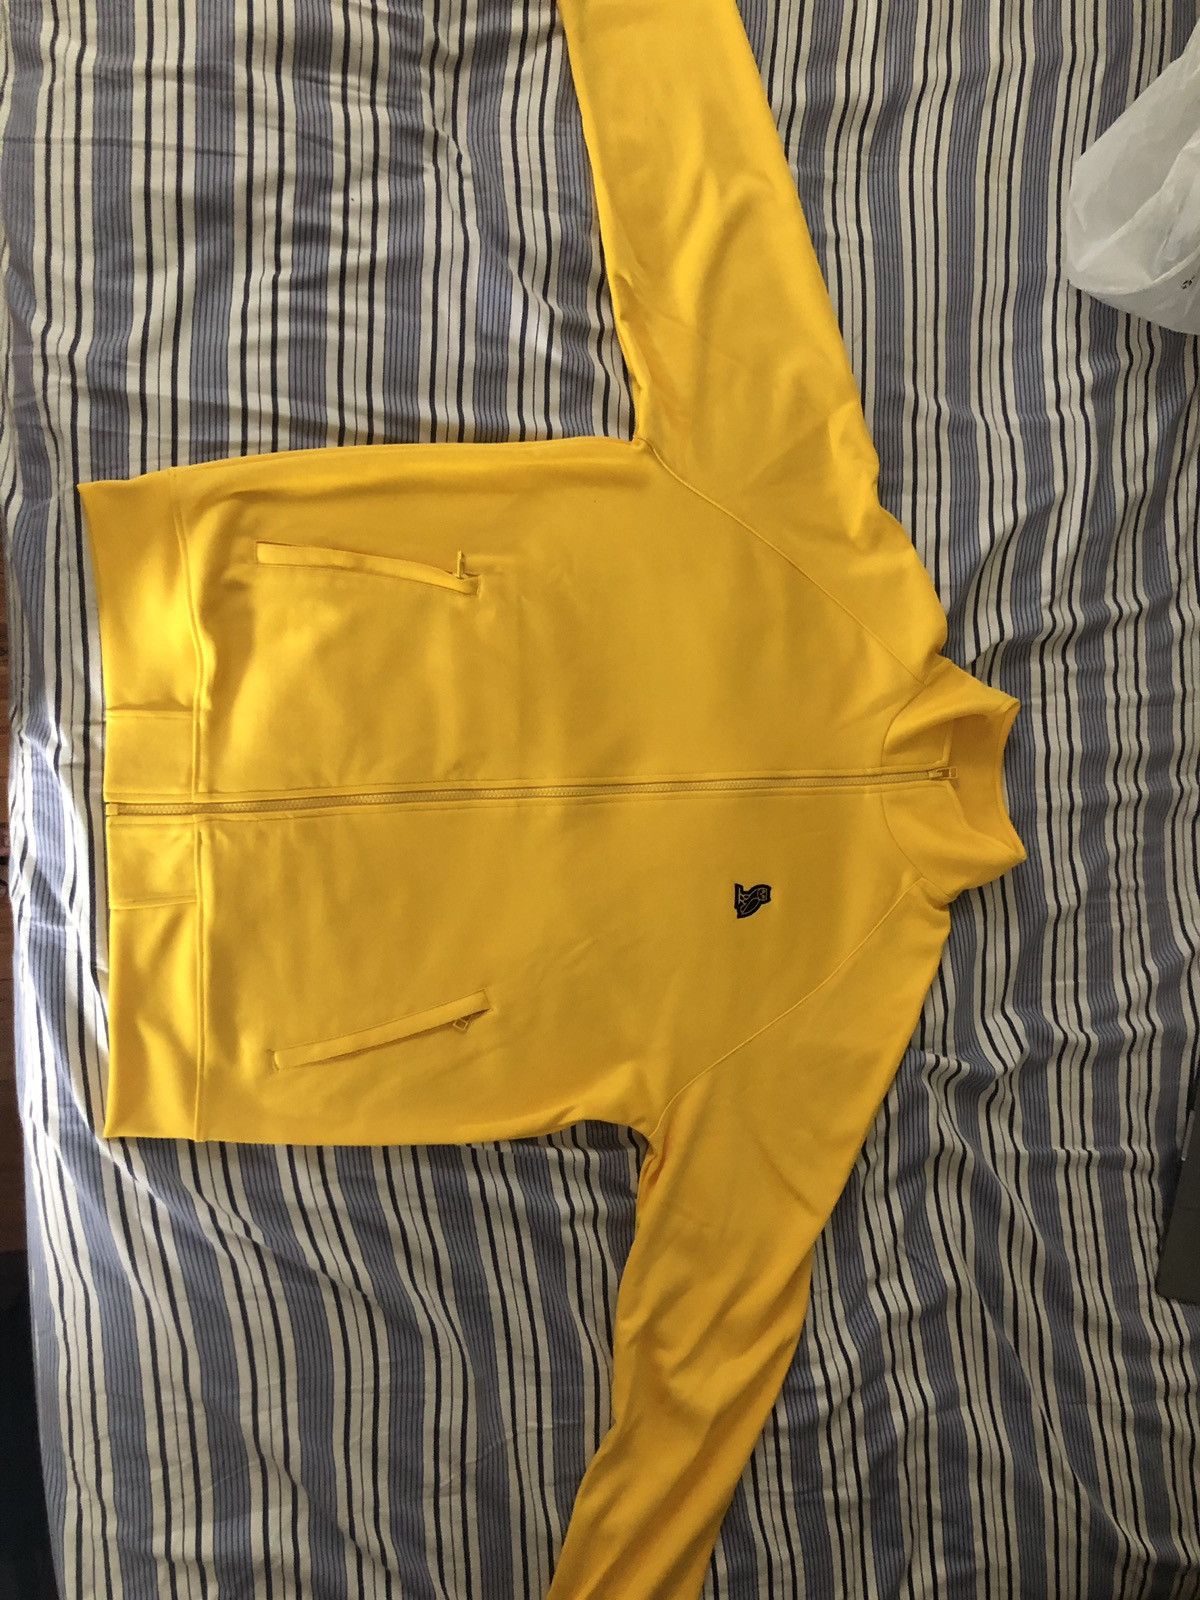 Octobers Very Own OVO zip up sweater Size US L / EU 52-54 / 3 - 2 Preview